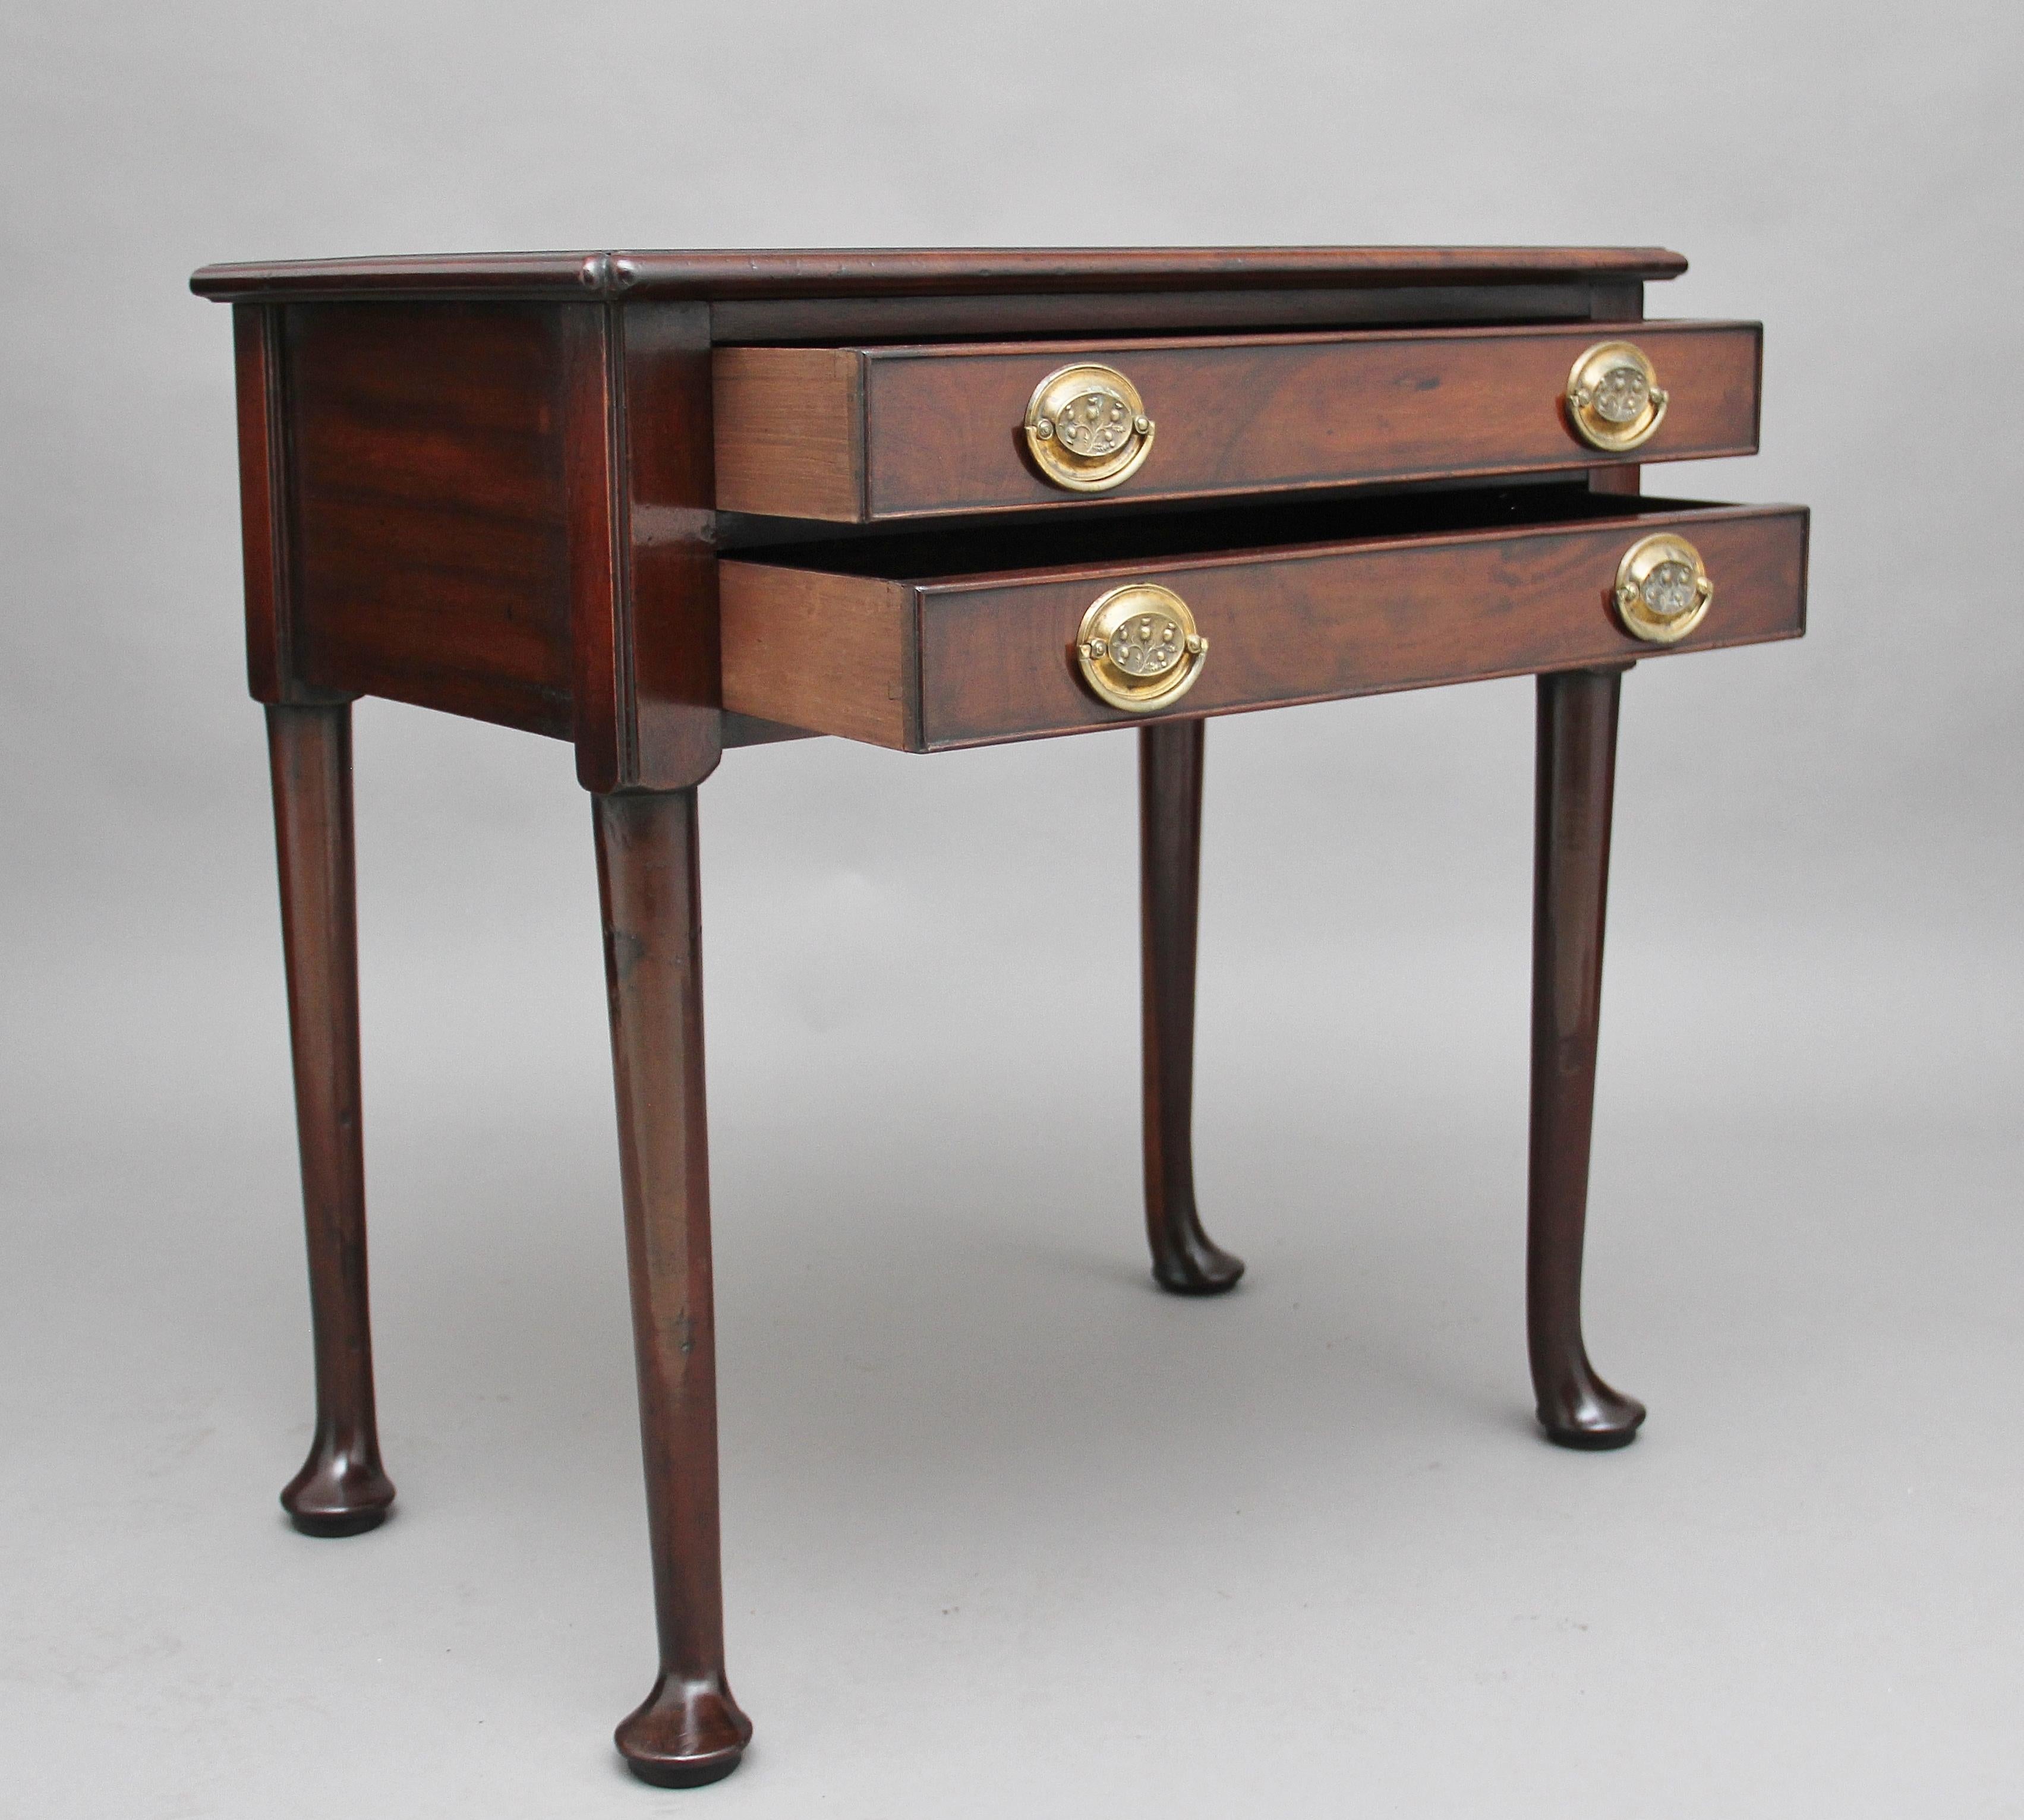 19th century mahogany side table, the rectangular shaped top having a thumb moulded edge above two drawers with original brass oval plate handles, supported on turned legs terminating on a pad foot. Fantastic color and in great condition, circa